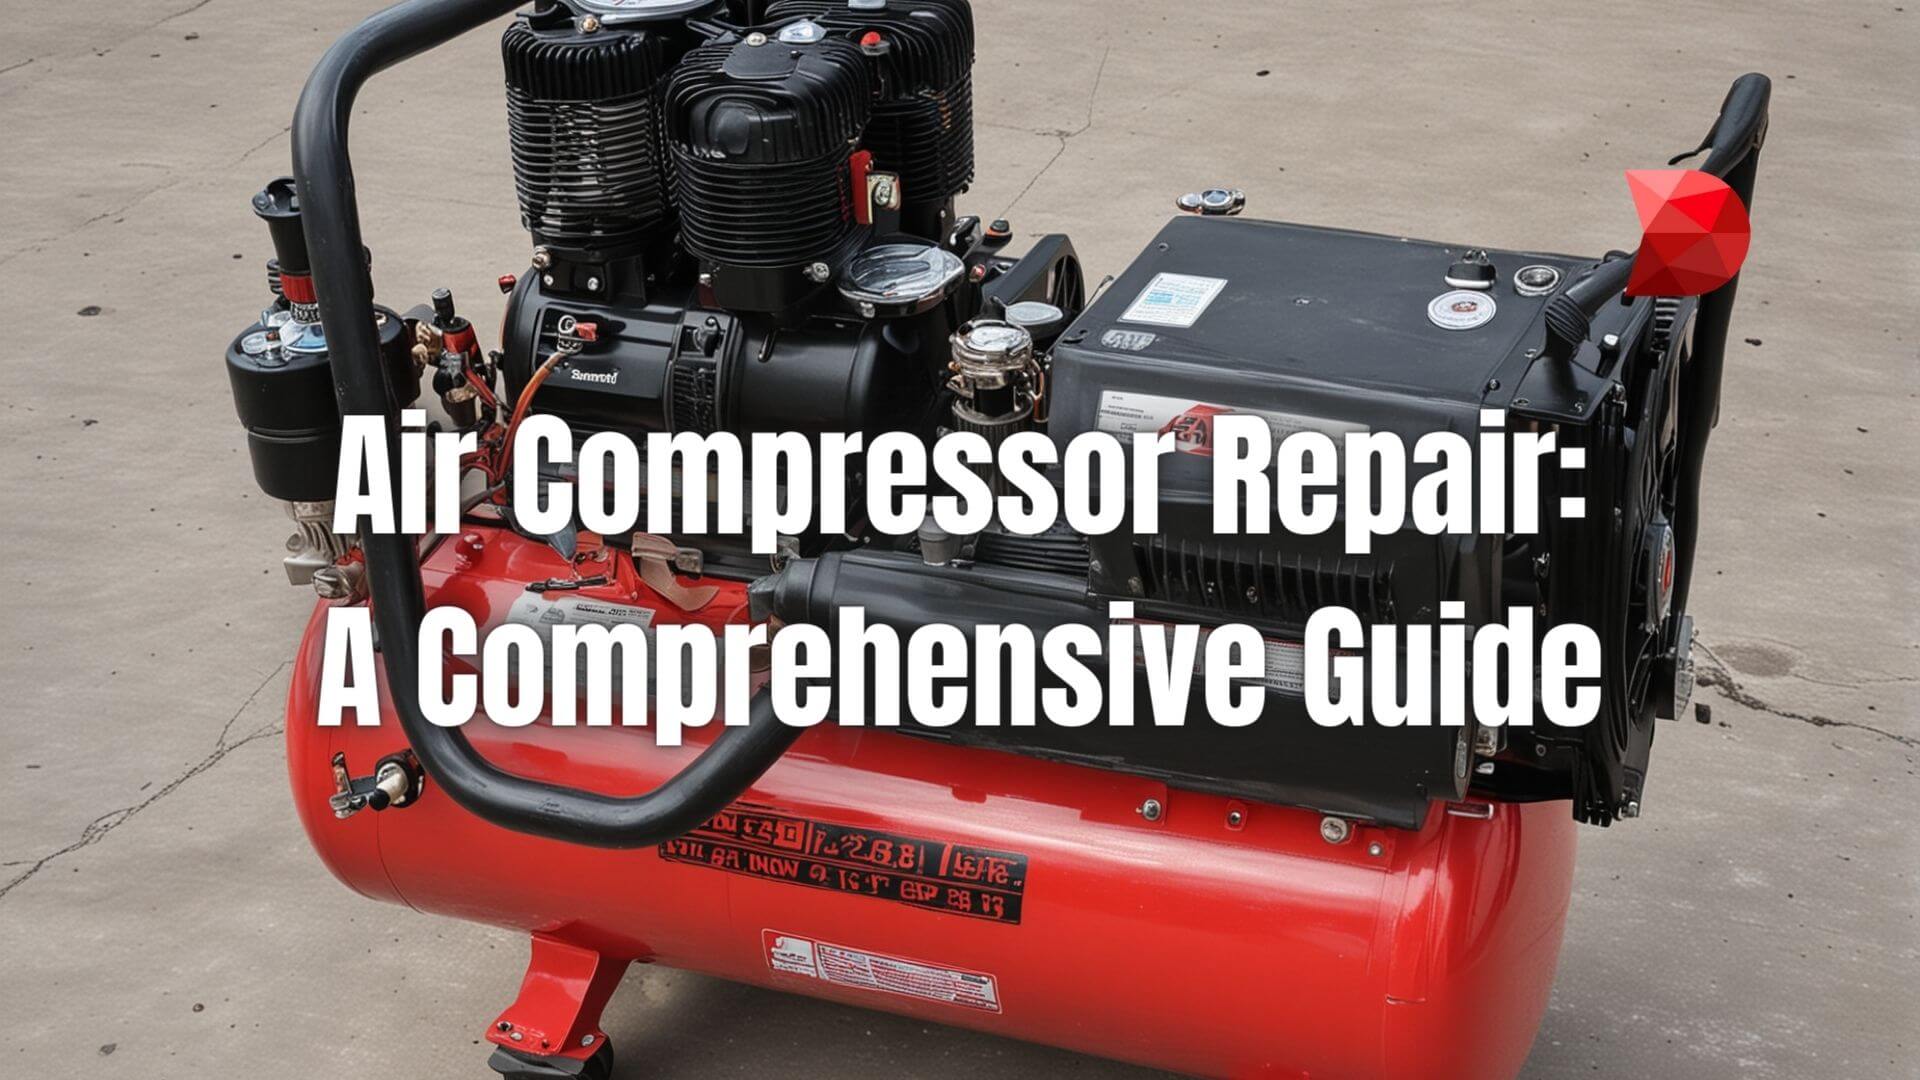 Keep your air compressor in top condition with our repair guide. Learn how to diagnose issues, perform repairs, and ensure peak performance.